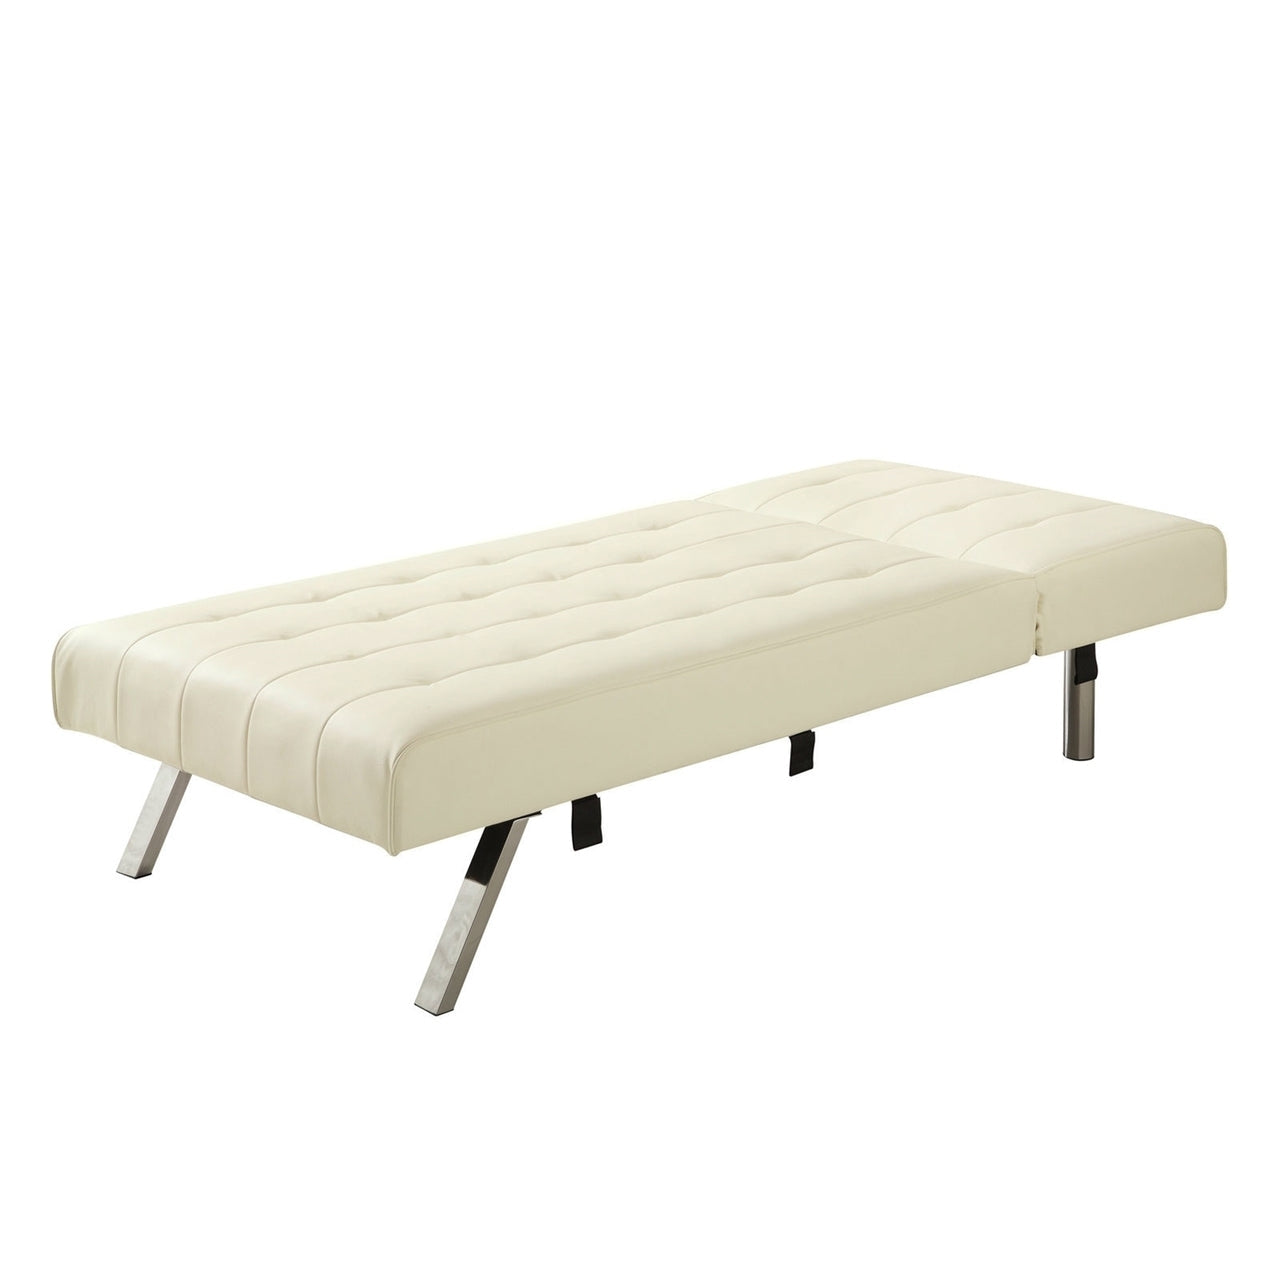 Living Room > Chaise Lounge & Settee - Vanilla Chaise Lounge Sleeper Bed With Contemporary Chrome Legs